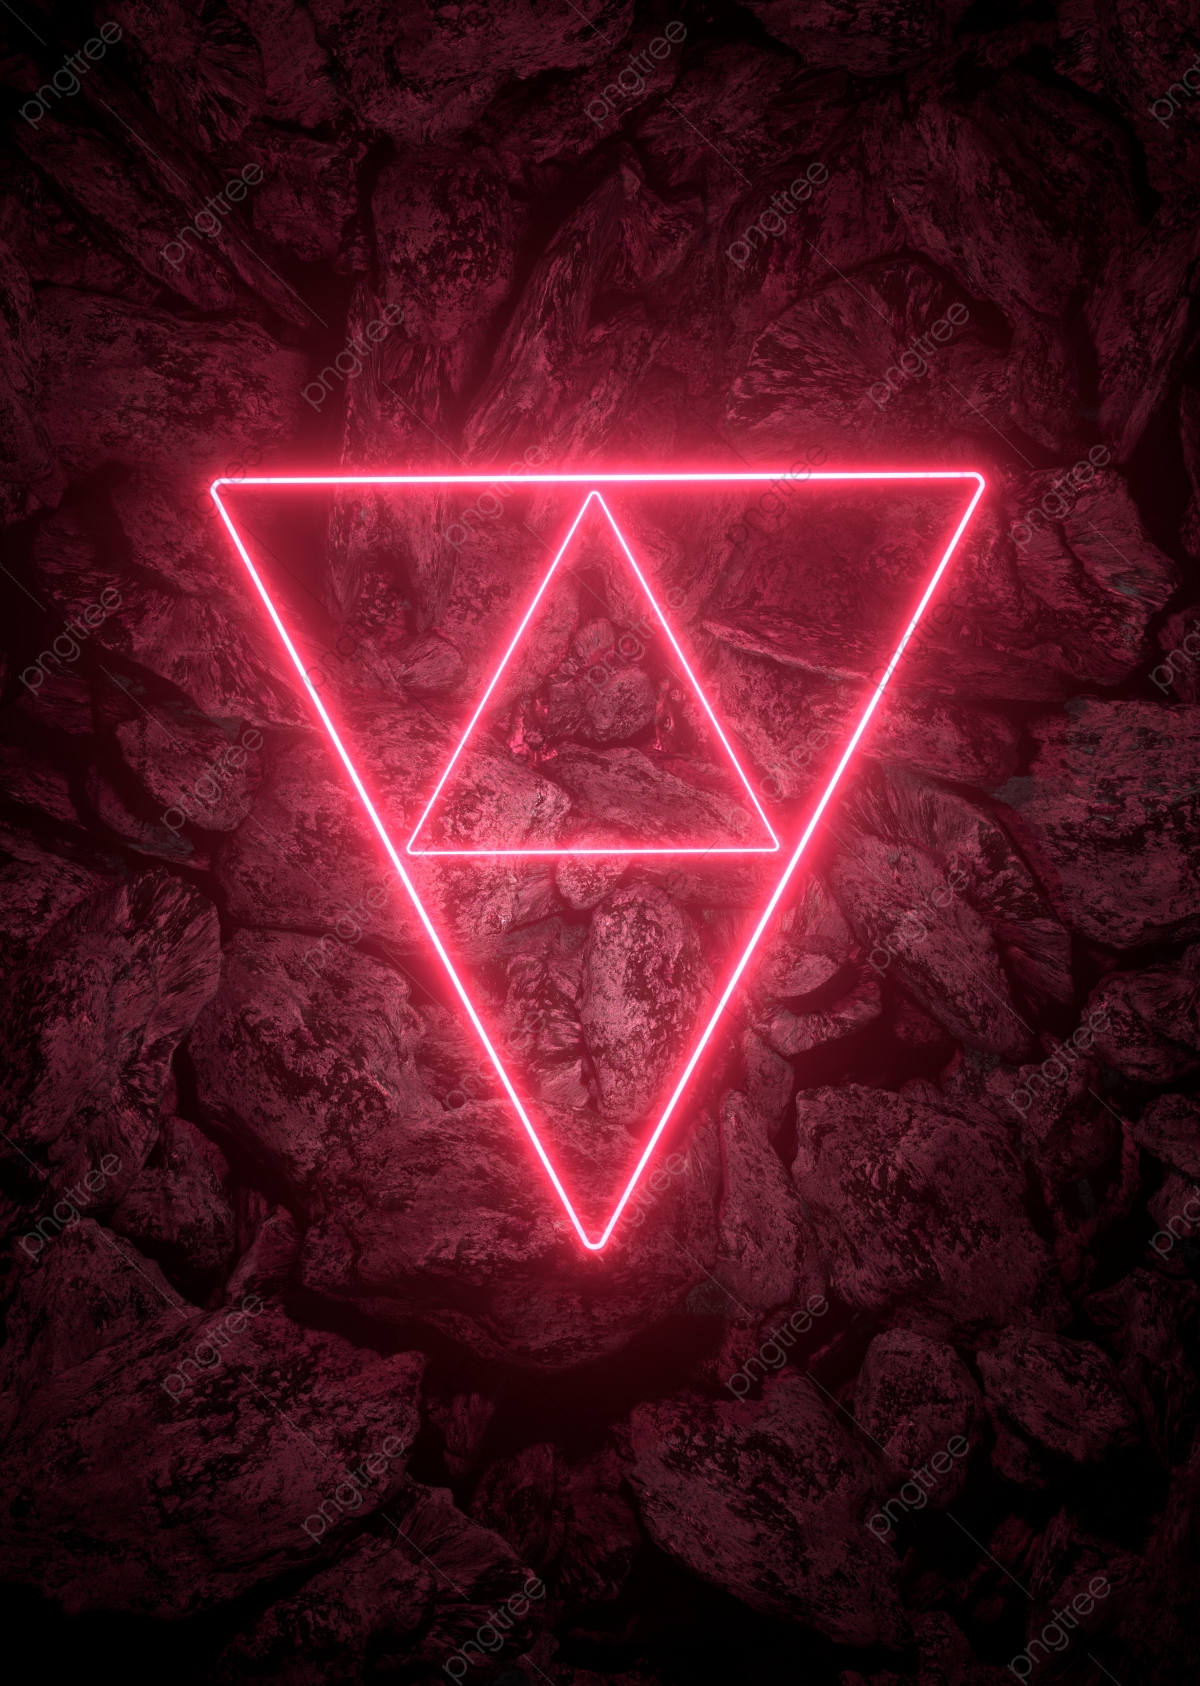 Red Triangle Wallpapers